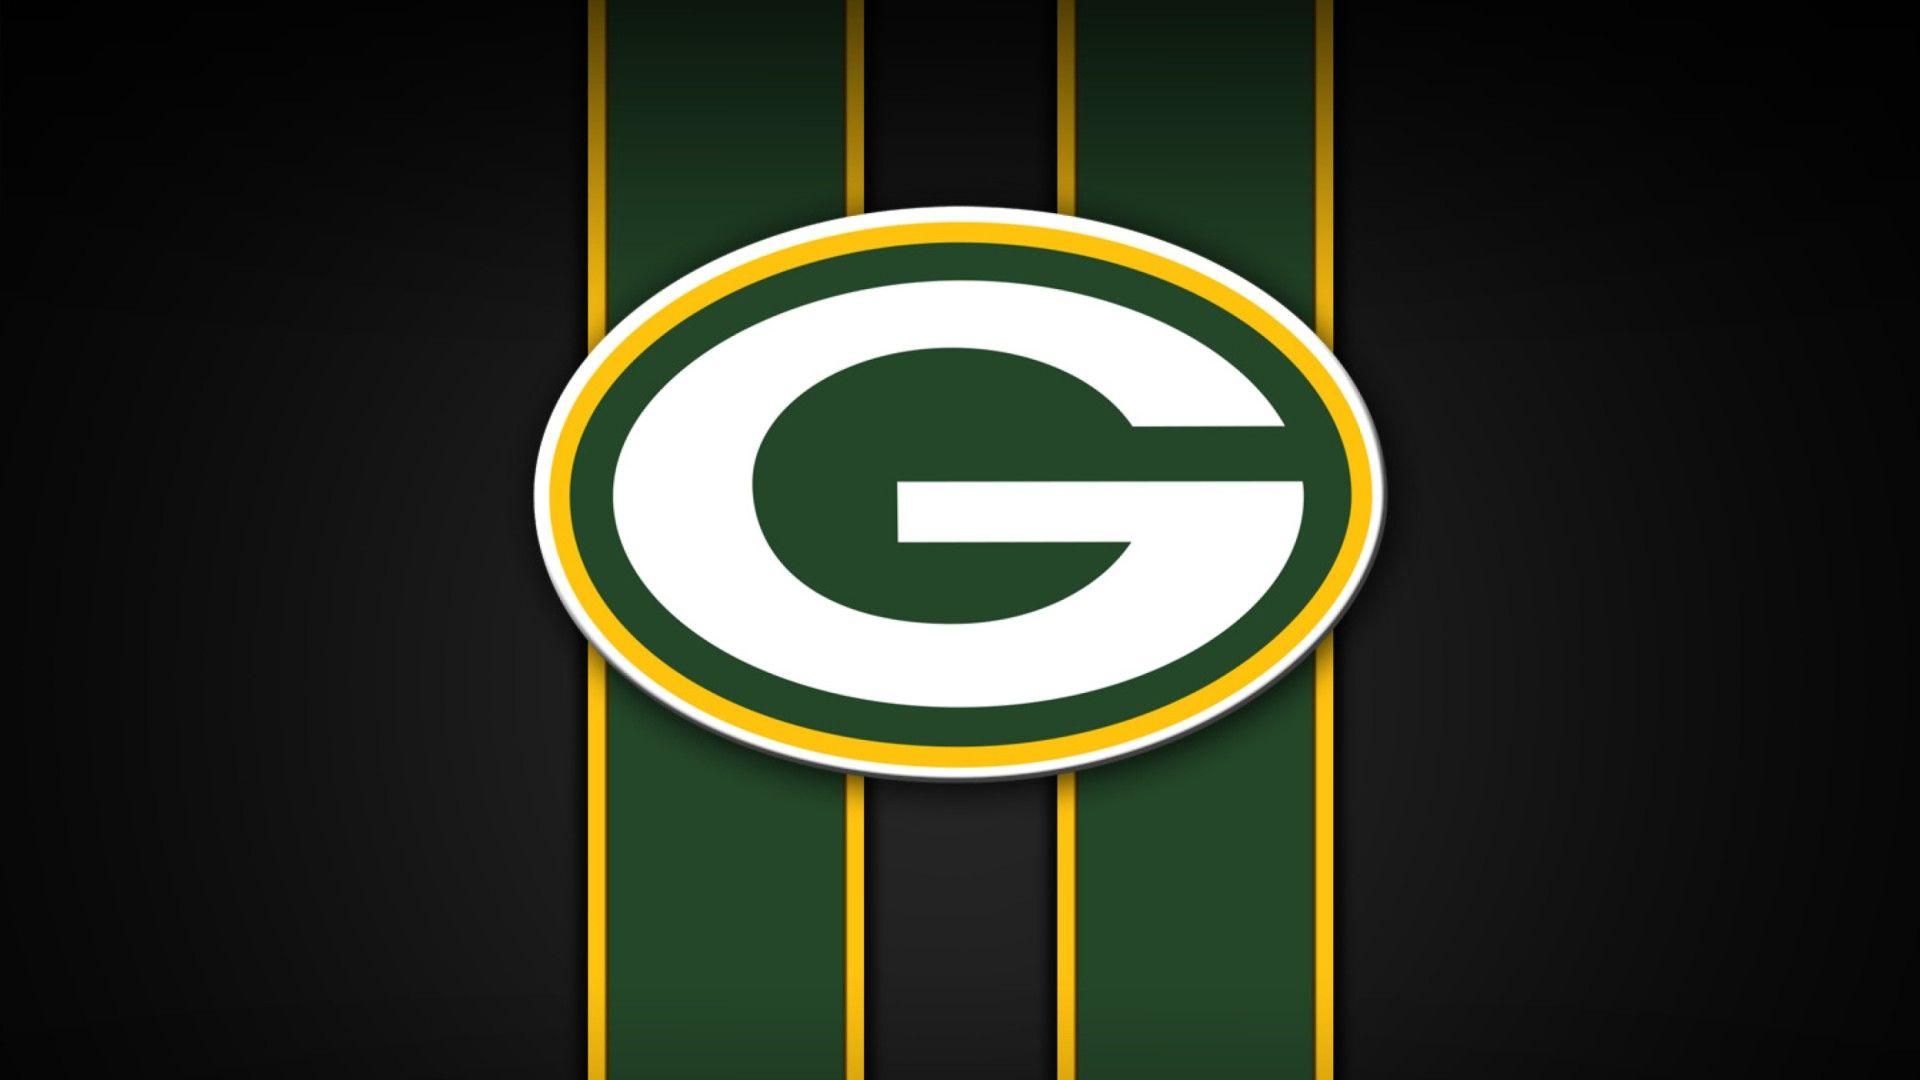 Green Bay Packers Mac Background. Green bay packers wallpaper